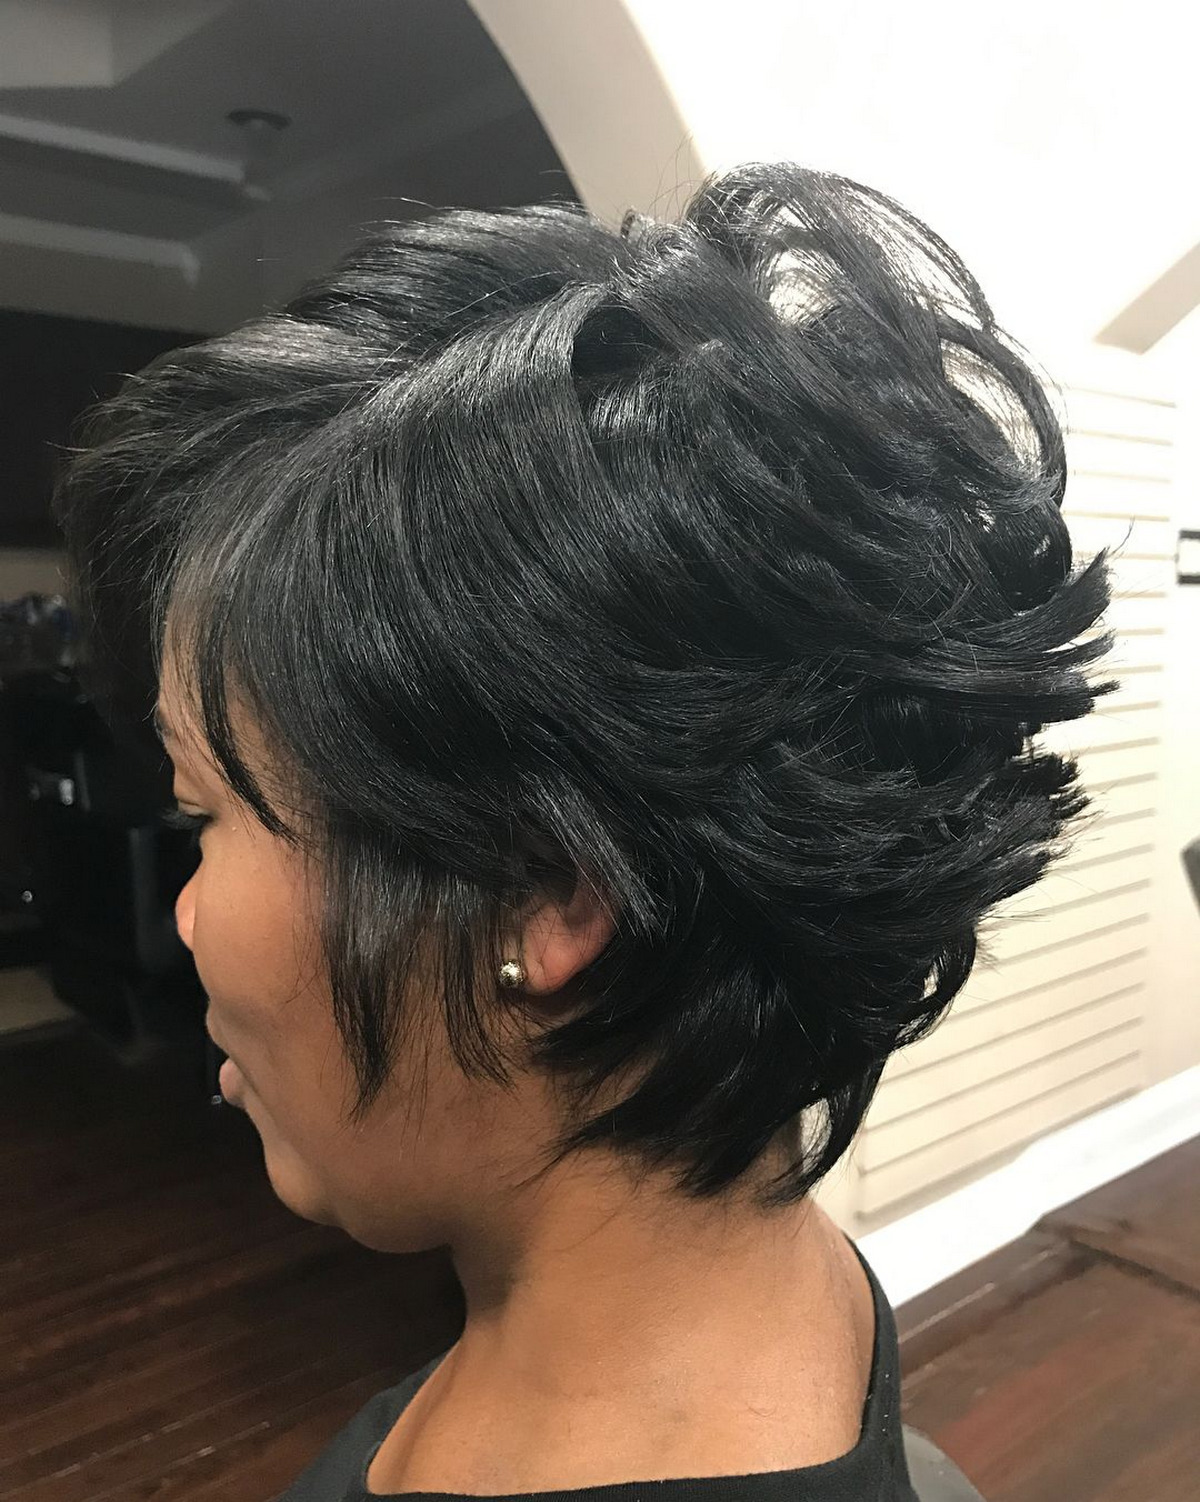  Long Black Pixie With Swept Back Layers